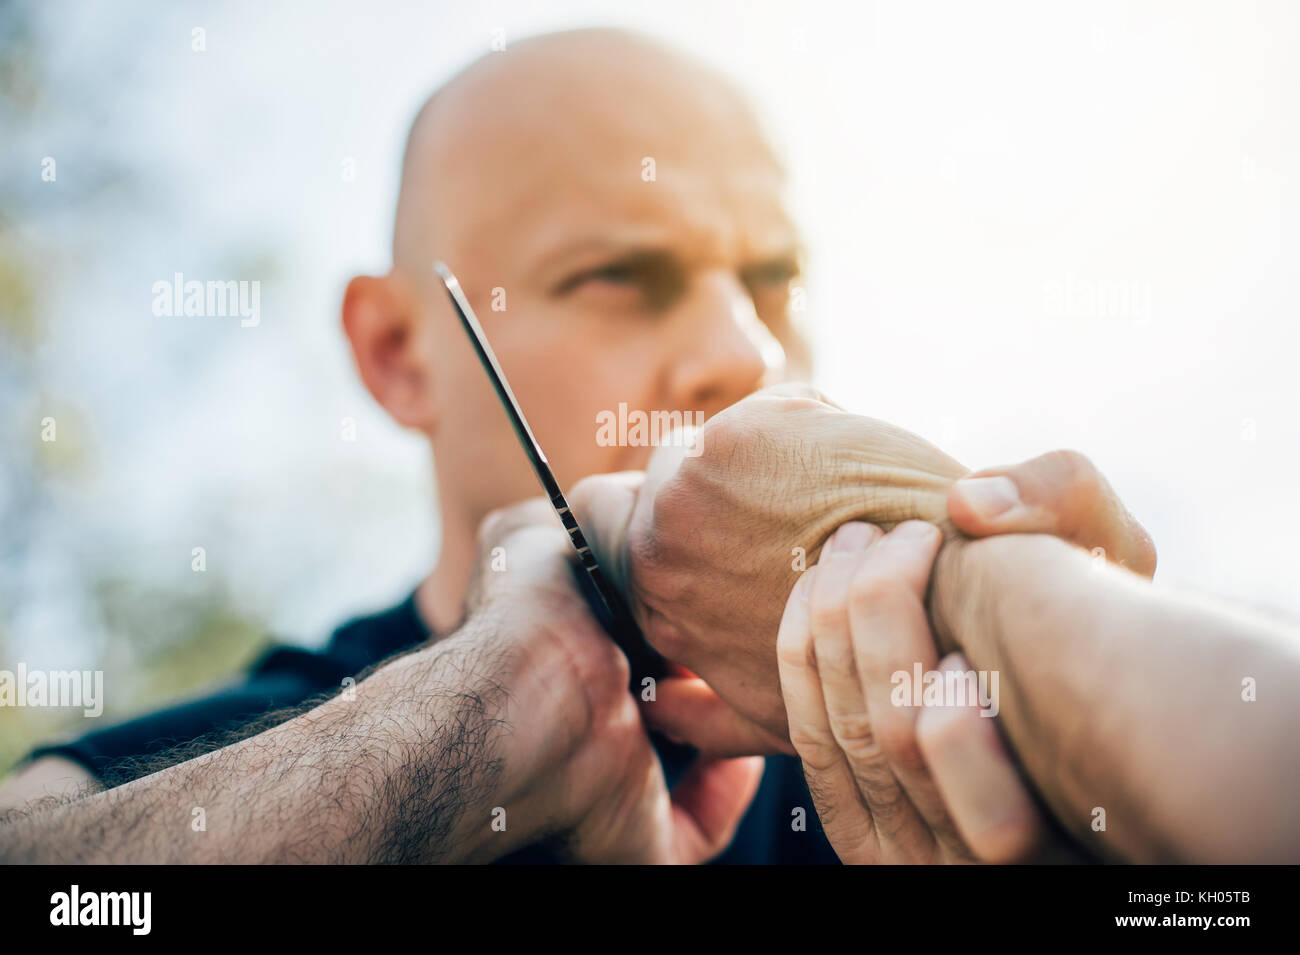 Kapap Instructor Demonstrates Martial Arts Self Defense Knife Attack Disarming Technique Against Threat And Knife Attack Weapon Retention And Disarm Stock Photo Alamy